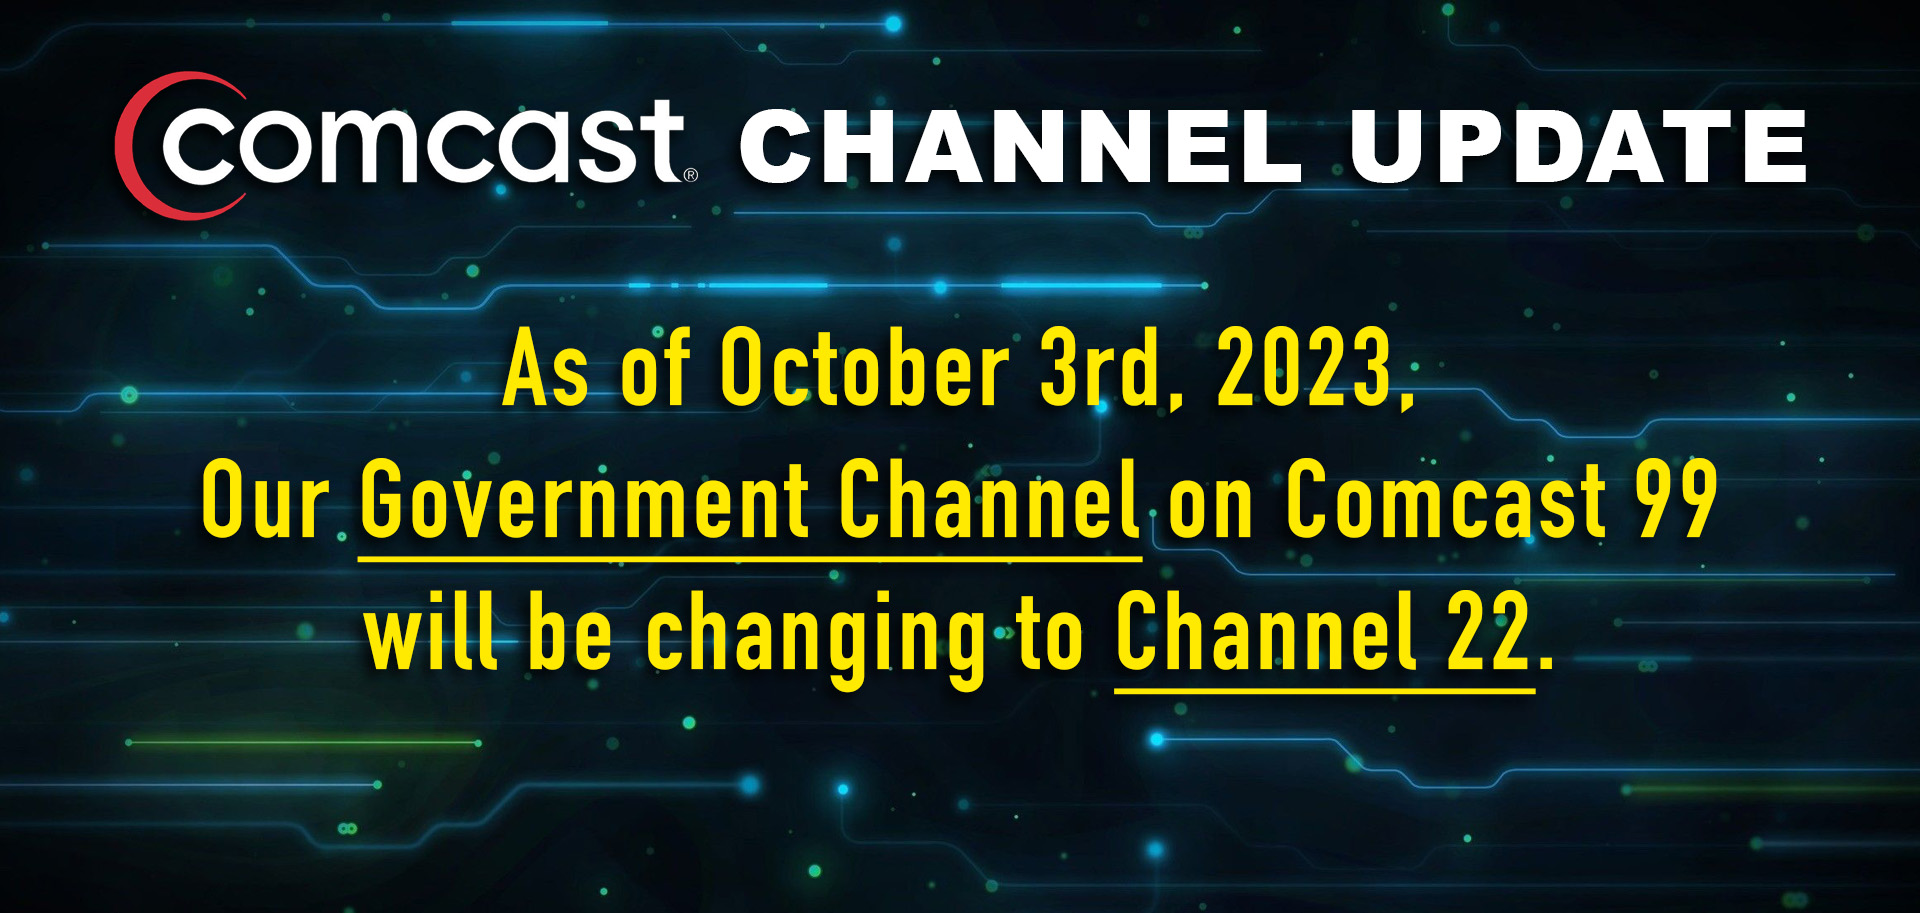 Comcast Channel Update